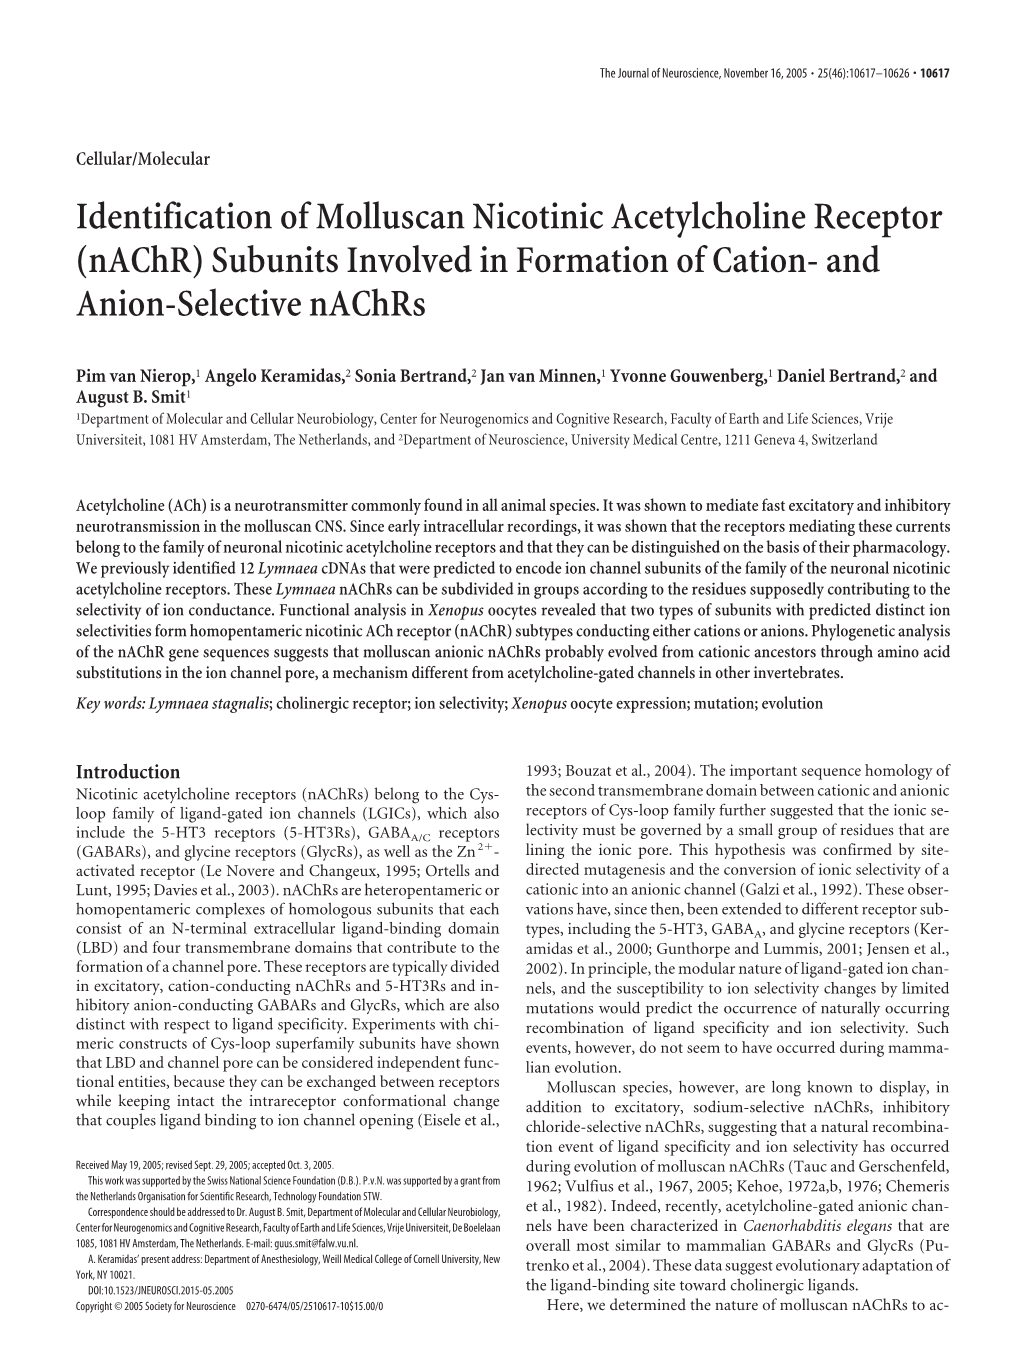 Identification of Molluscan Nicotinic Acetylcholine Receptor (Nachr) Subunits Involved in Formation of Cation- and Anion-Selective Nachrs